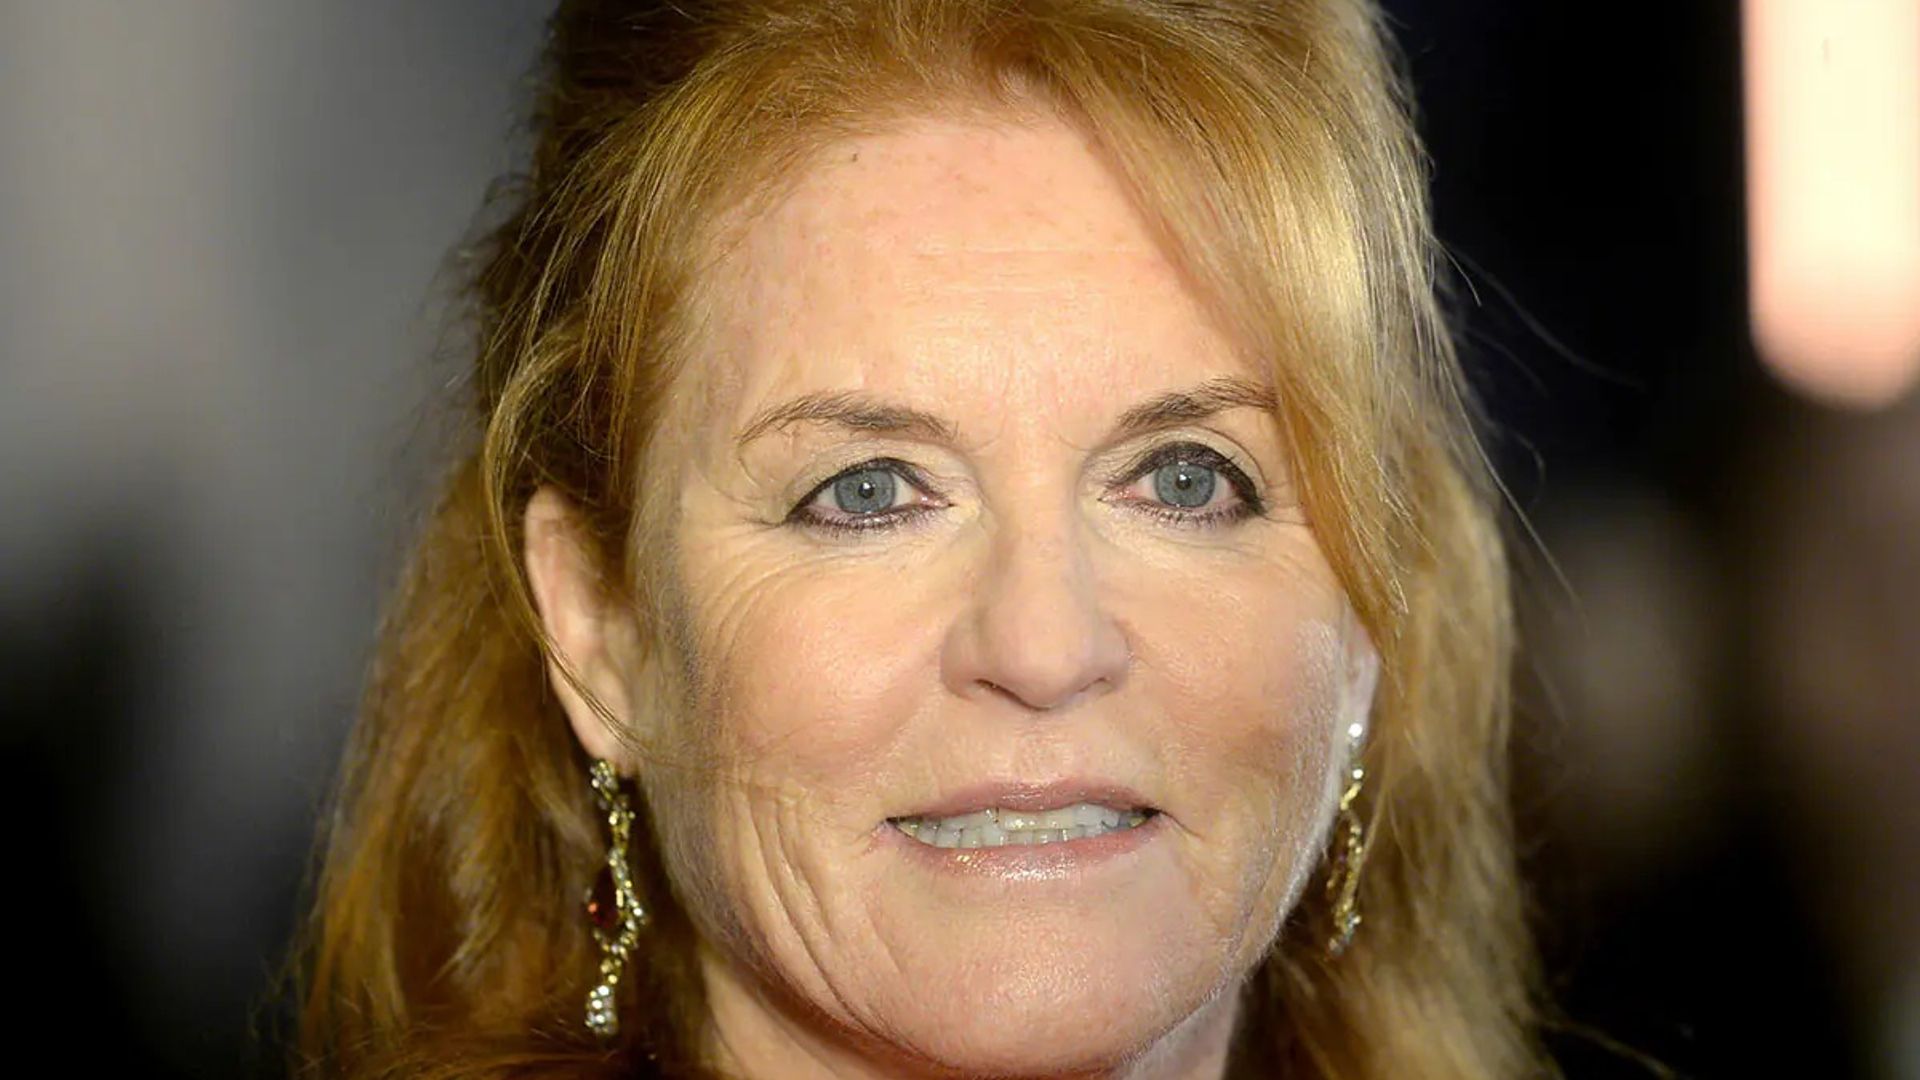 Sarah Ferguson returns to social media after controversial Prince Andrew posts